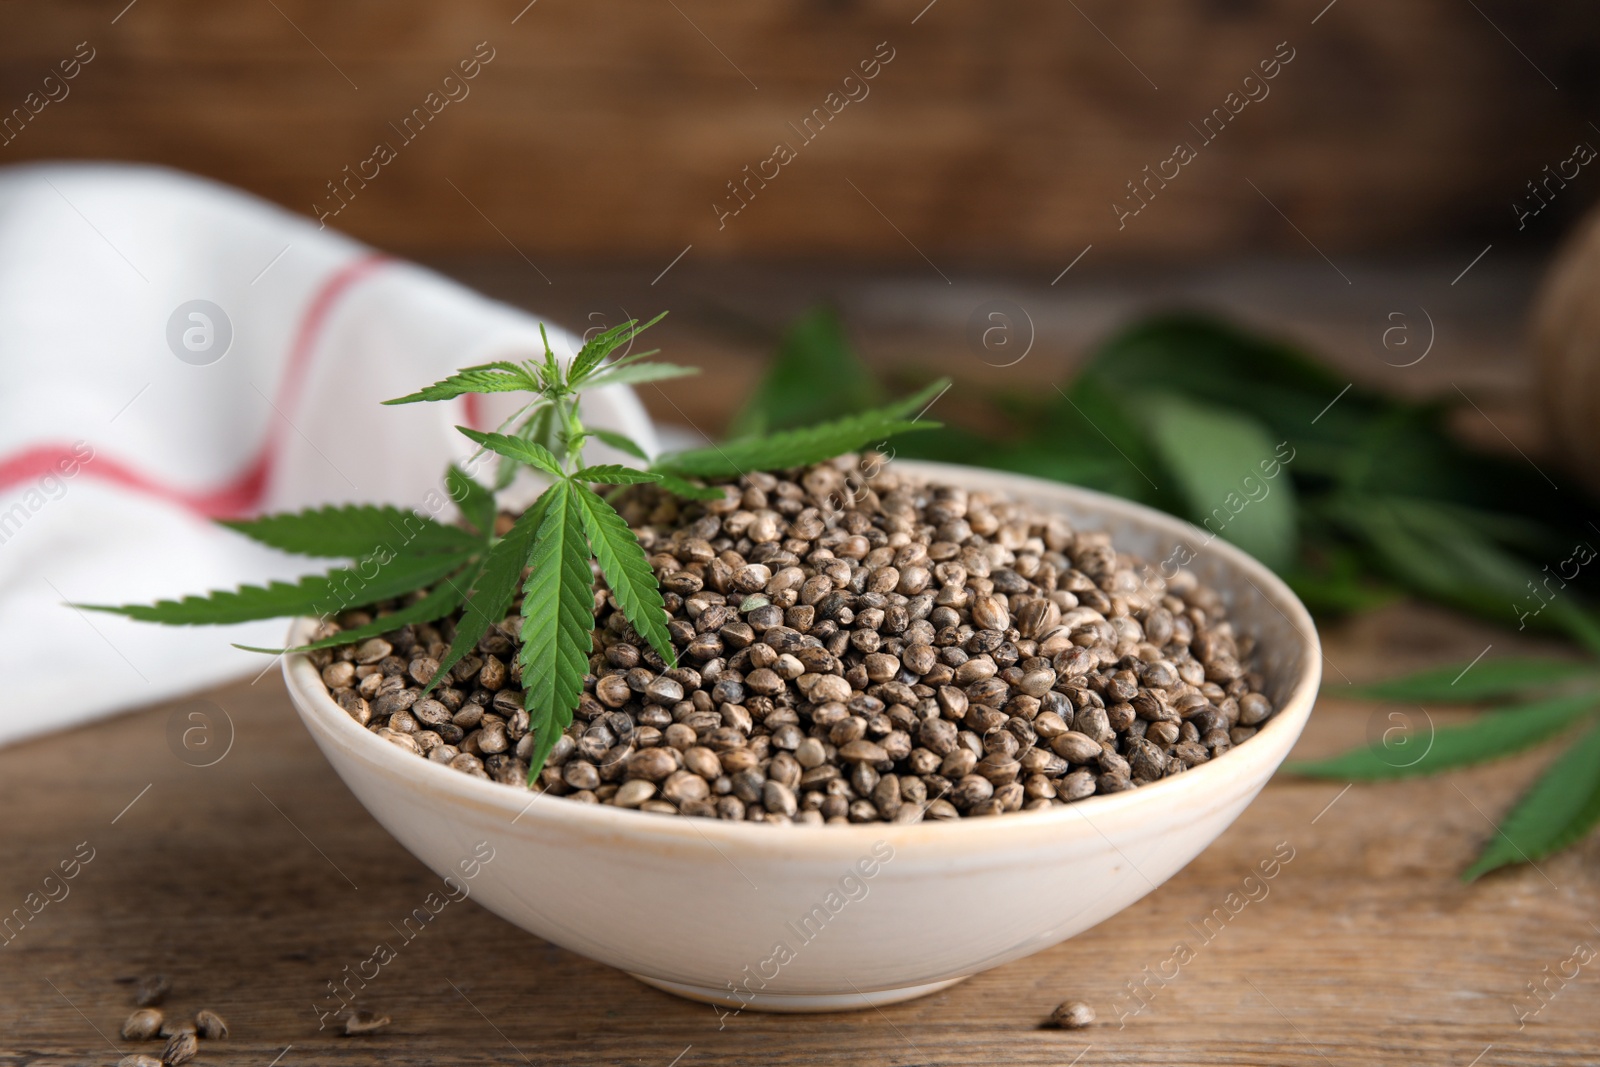 Photo of Bowl with hemp seeds and leaves on wooden table